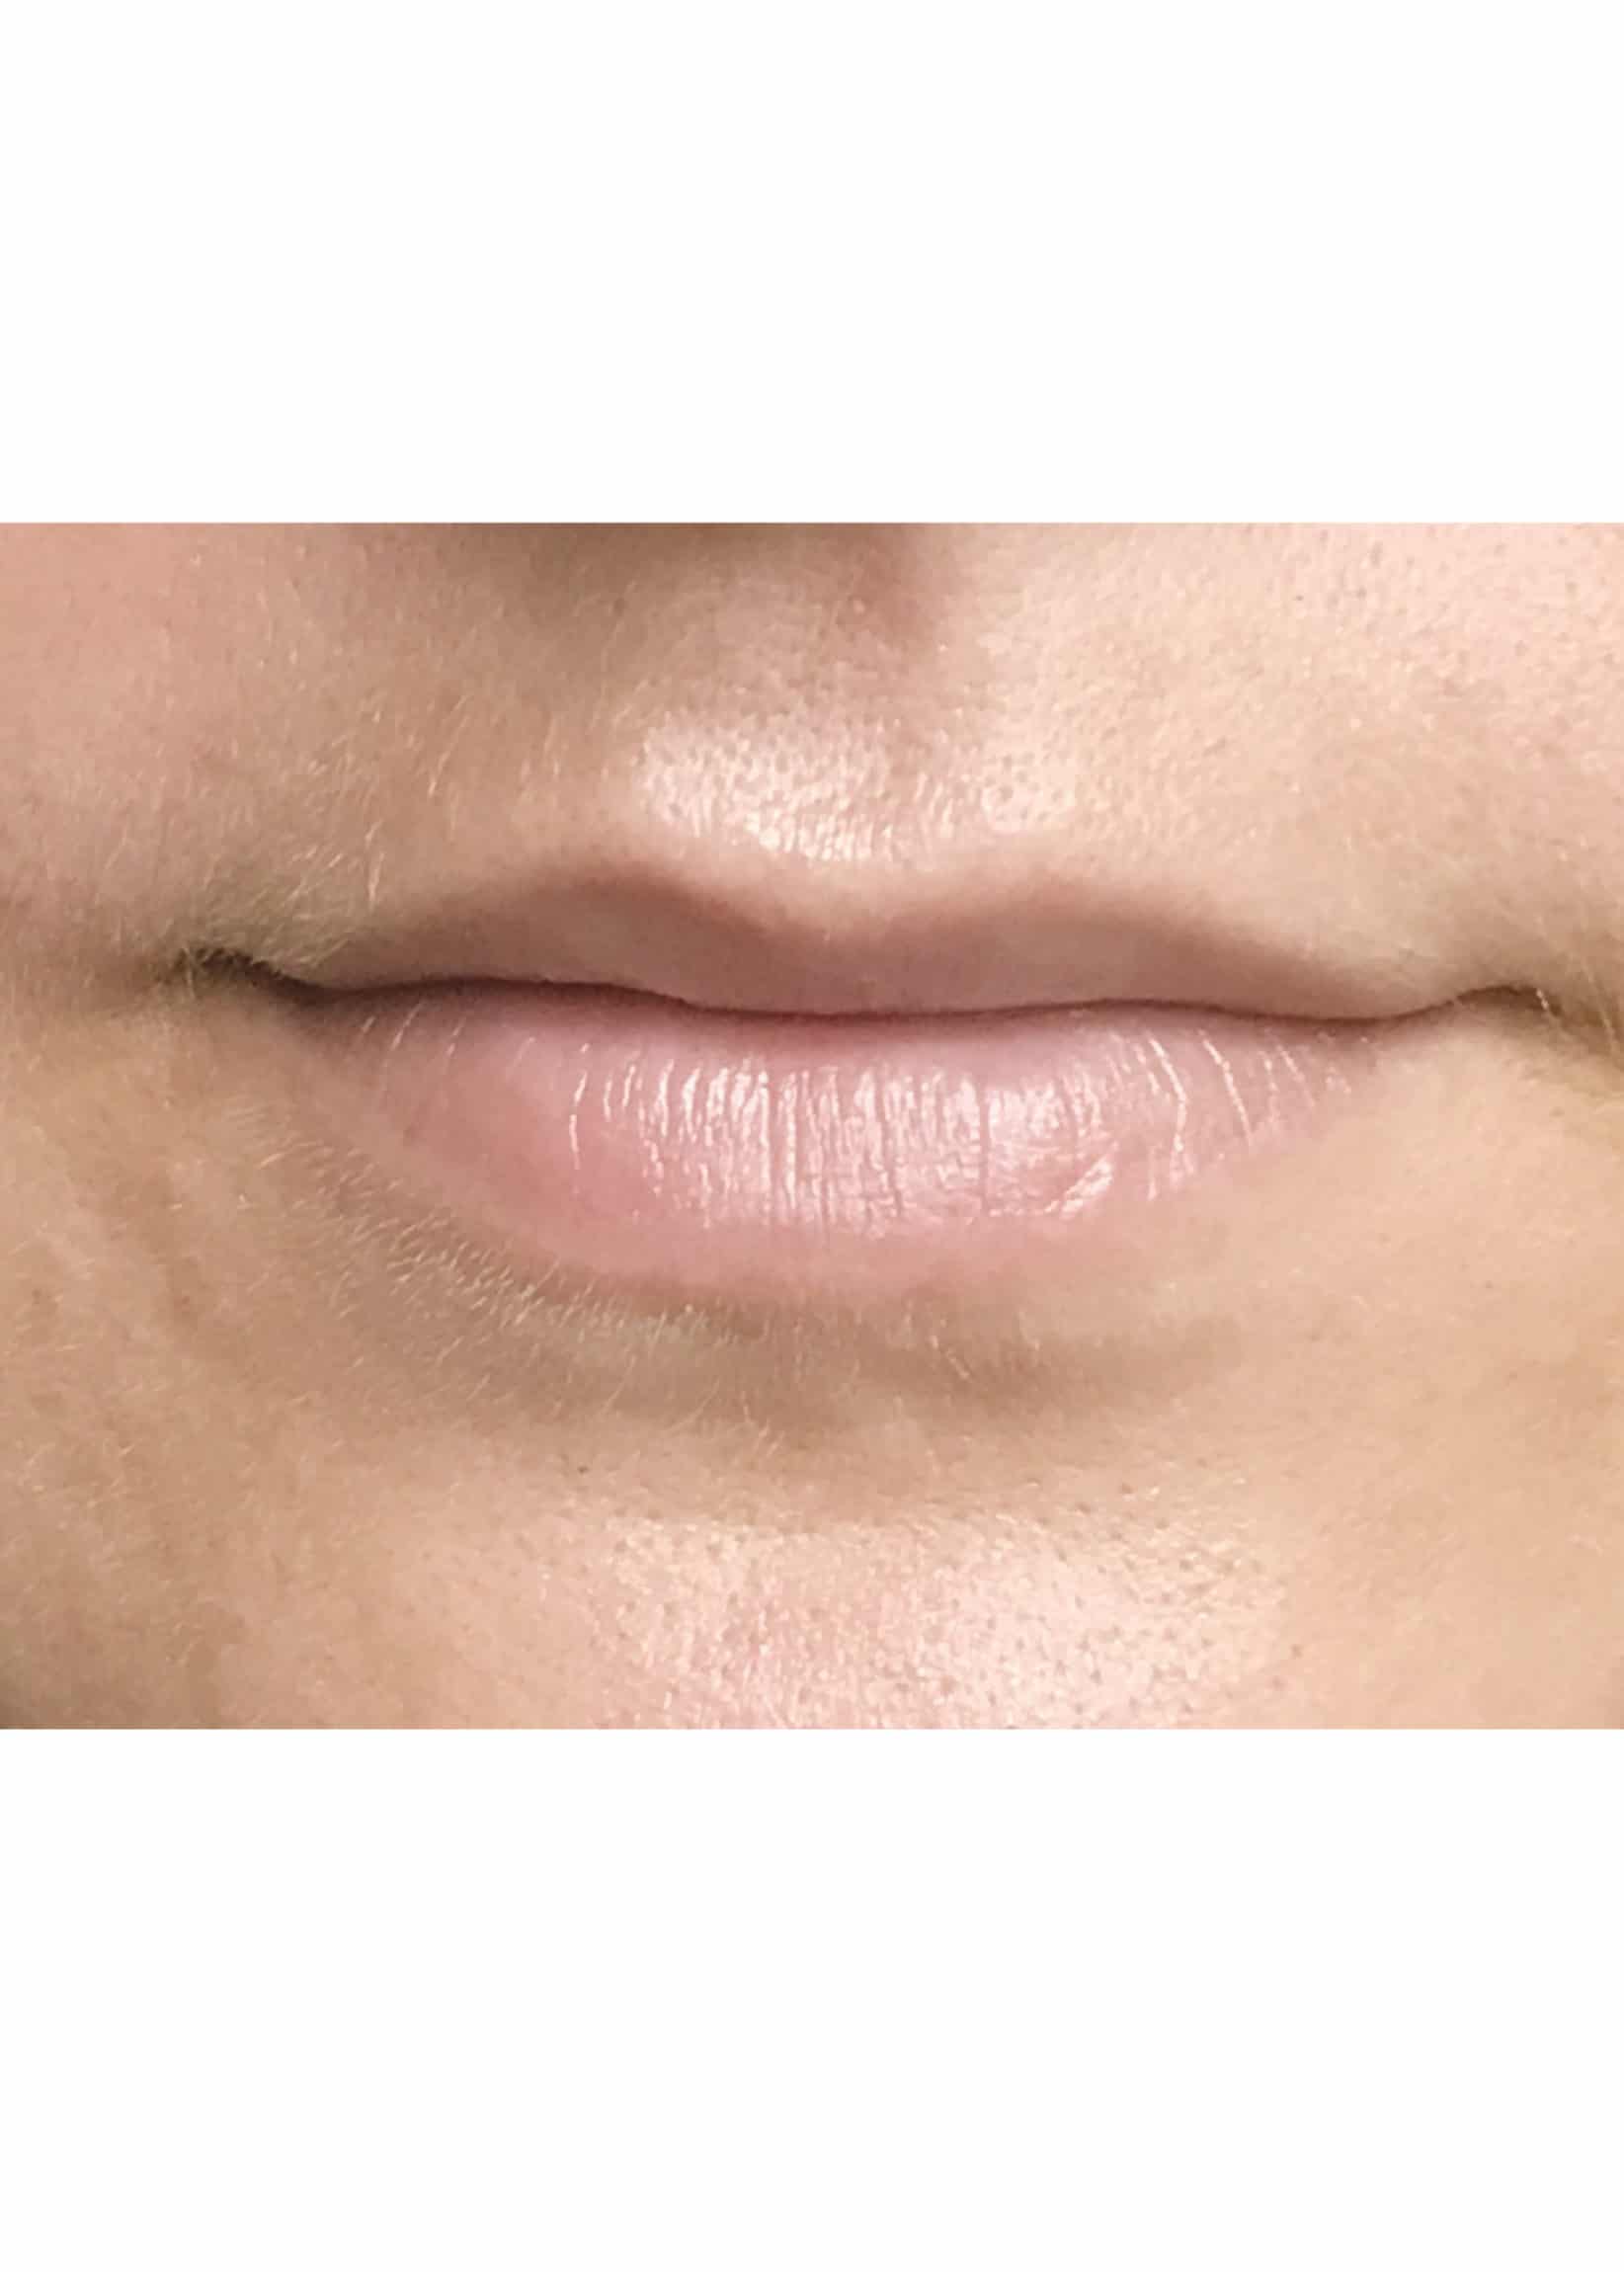 TheSkinCenter ProviderPages TiffaneyBeddow LipFiller Before 5 scaled 1